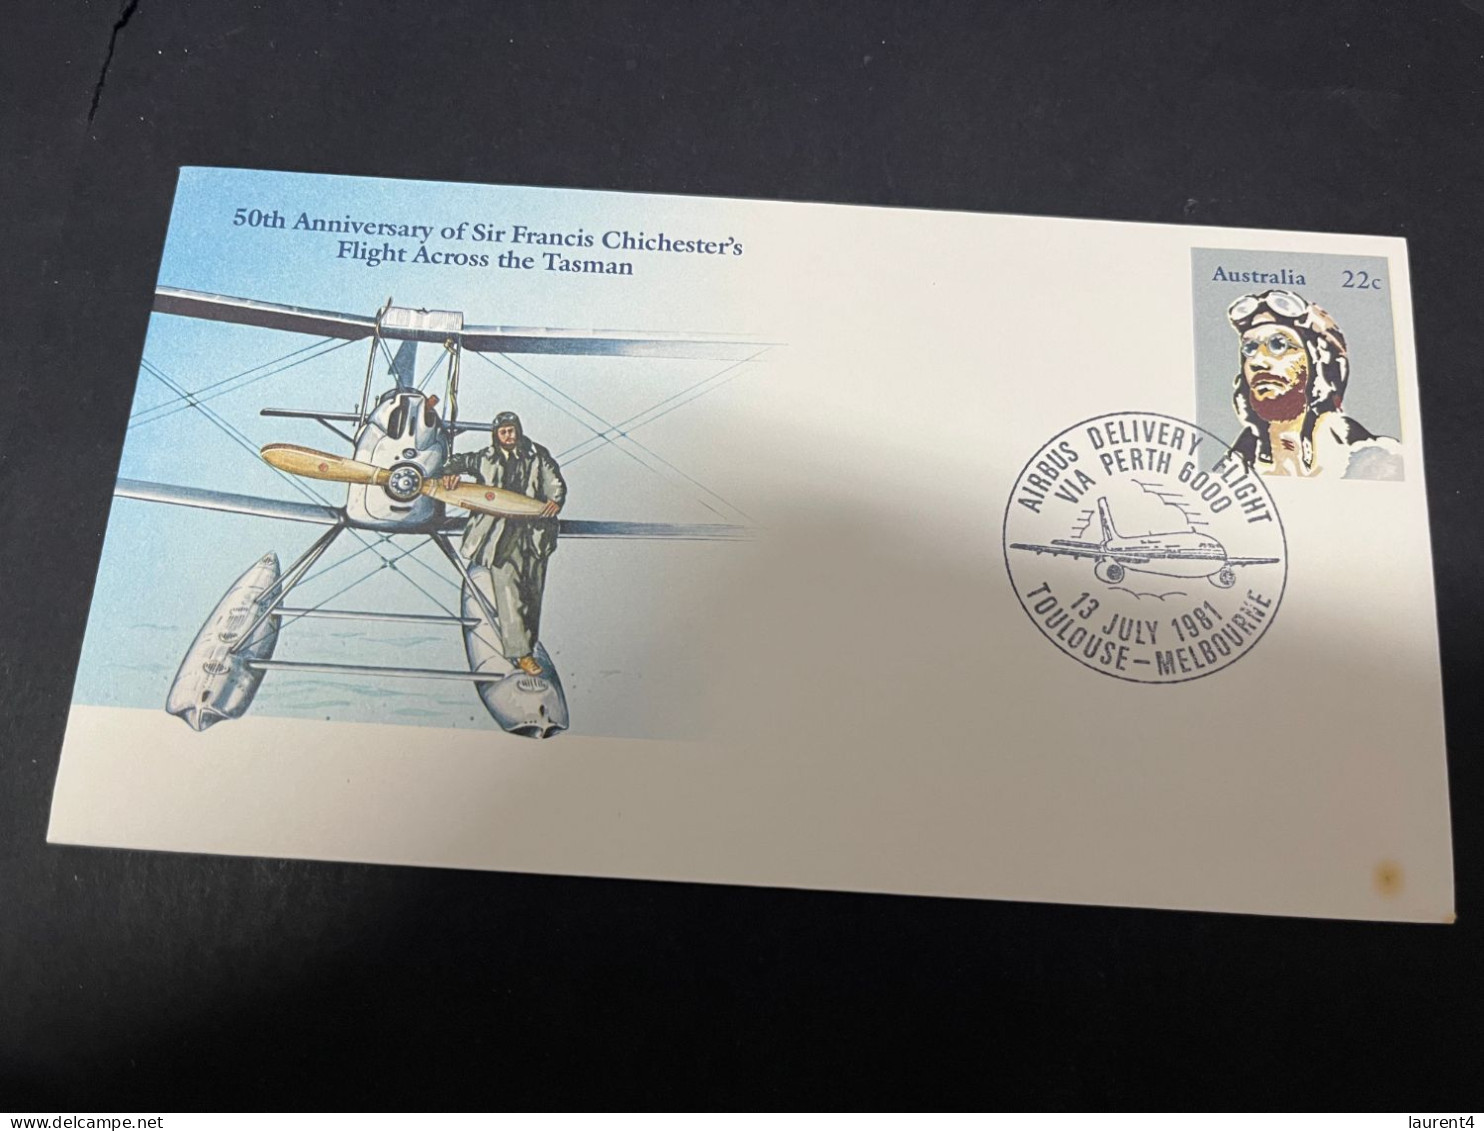 30-4-2023 (3 Z 29) Australia FDC (1 Cover) 1981 - 50th Anniversary Francis Chichesters (Airbus Delivery Via Perh) - Ersttagsbelege (FDC)